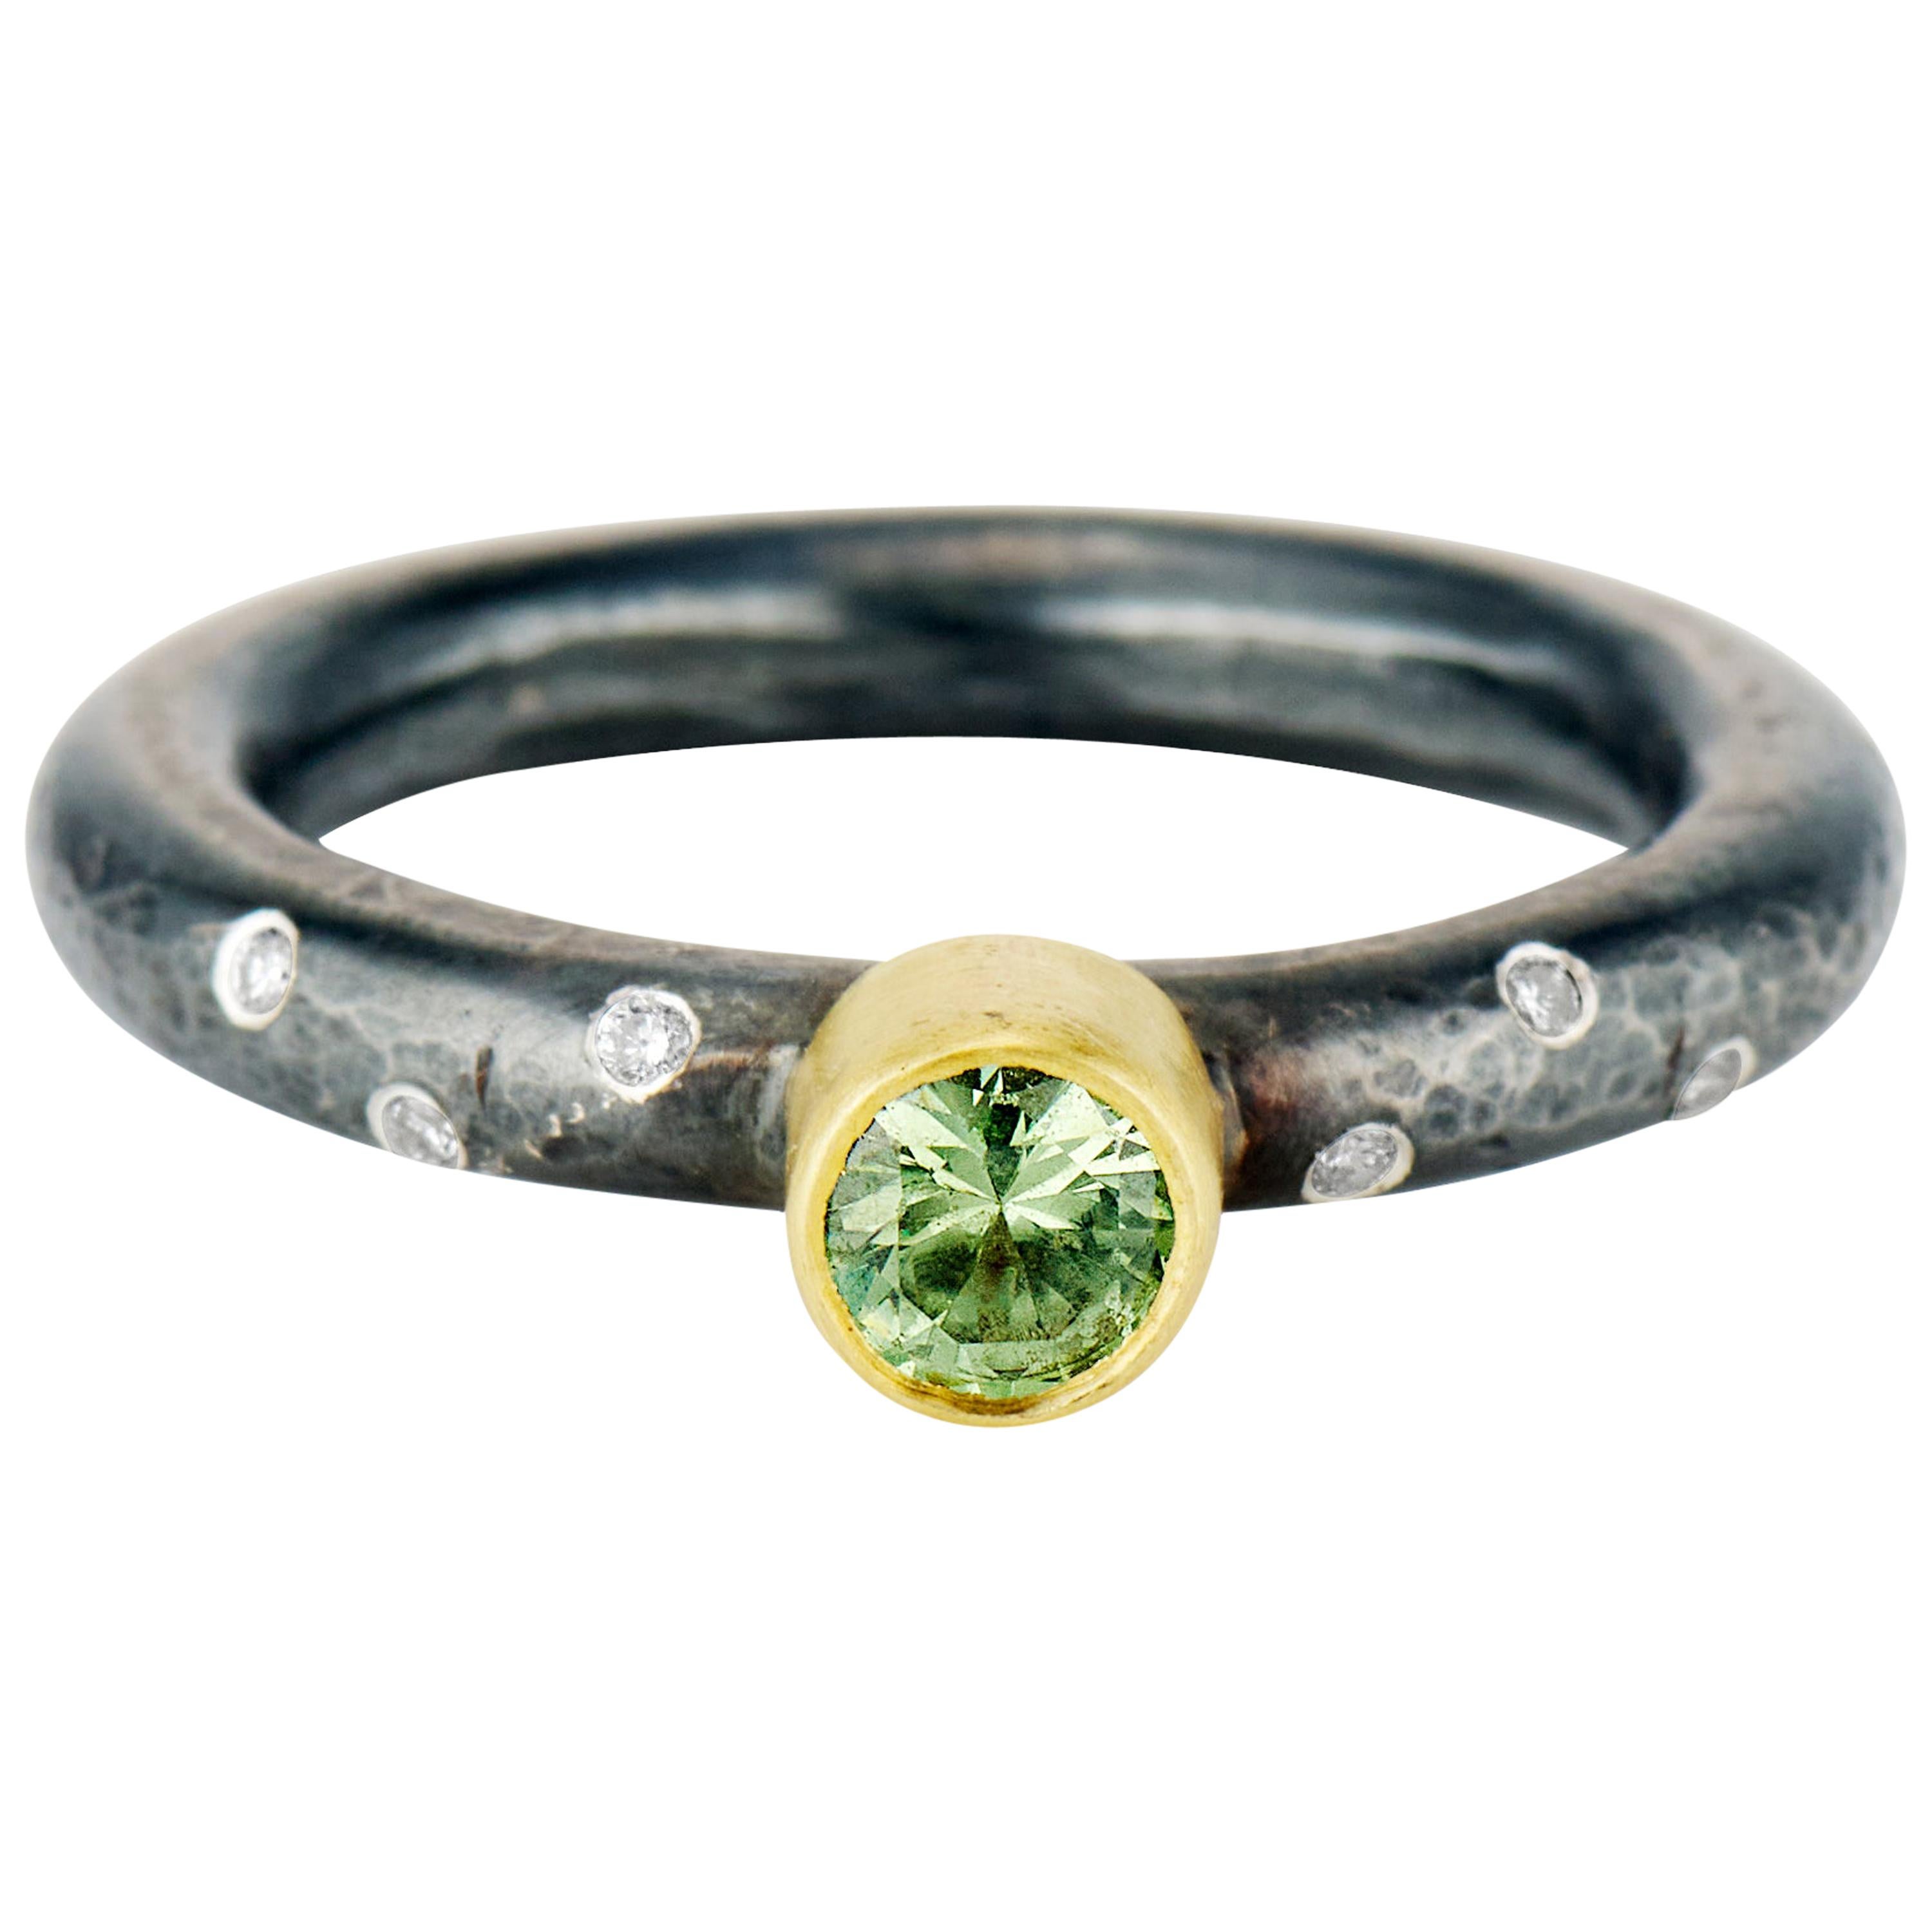 Contemporary Mint Green Tourmaline, Diamonds, Mixed Metal, Silver and Gold Ring